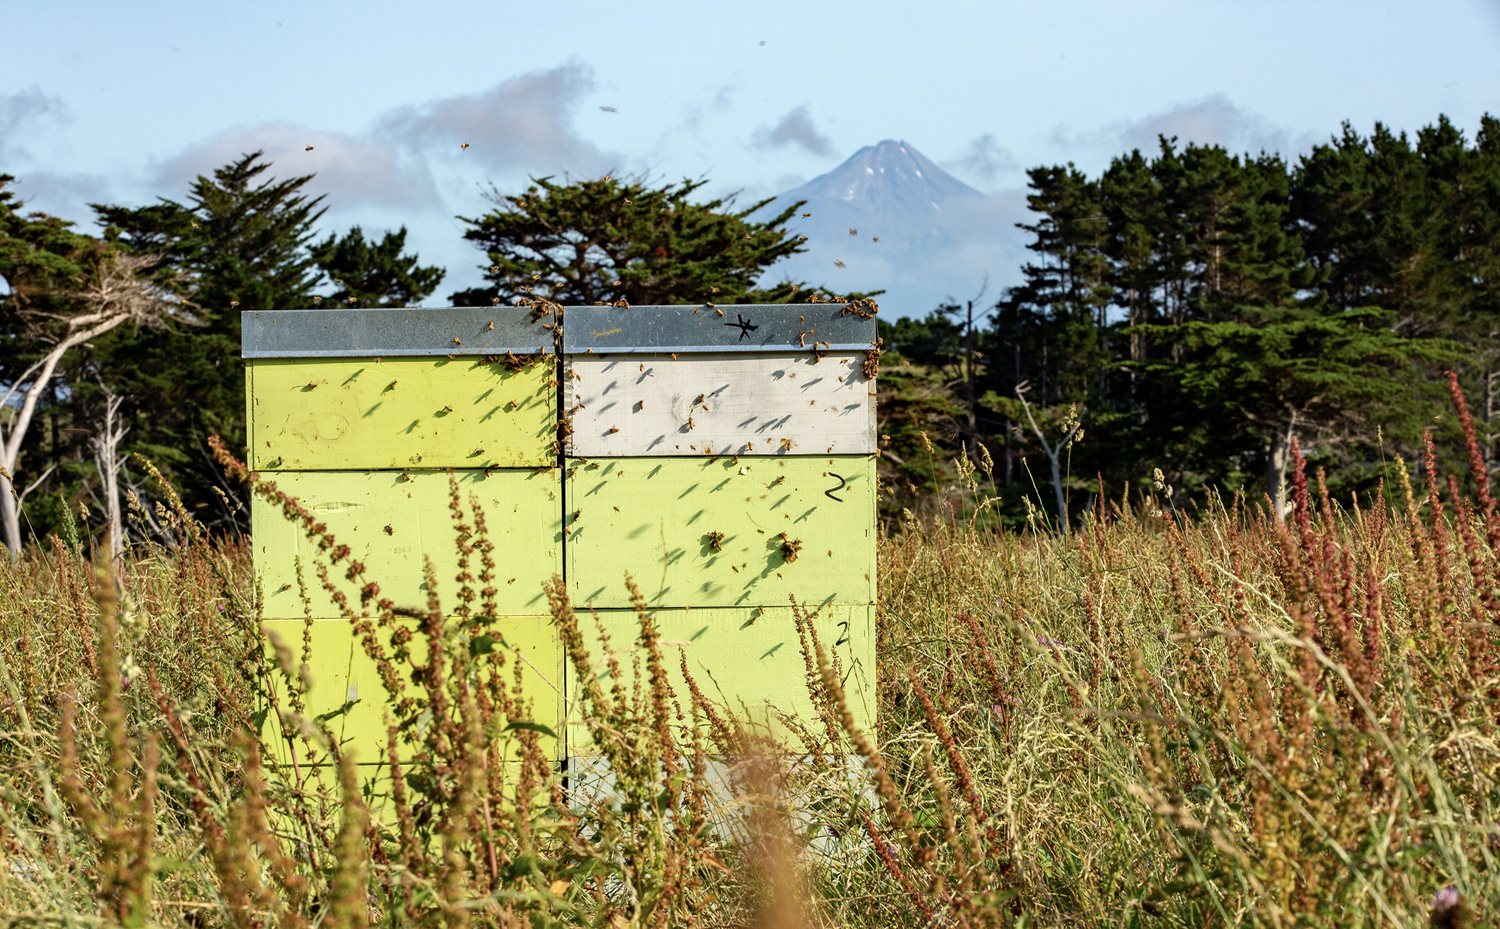 A photo of a yellow beehive in a field with tall grass and a forest in the distant background